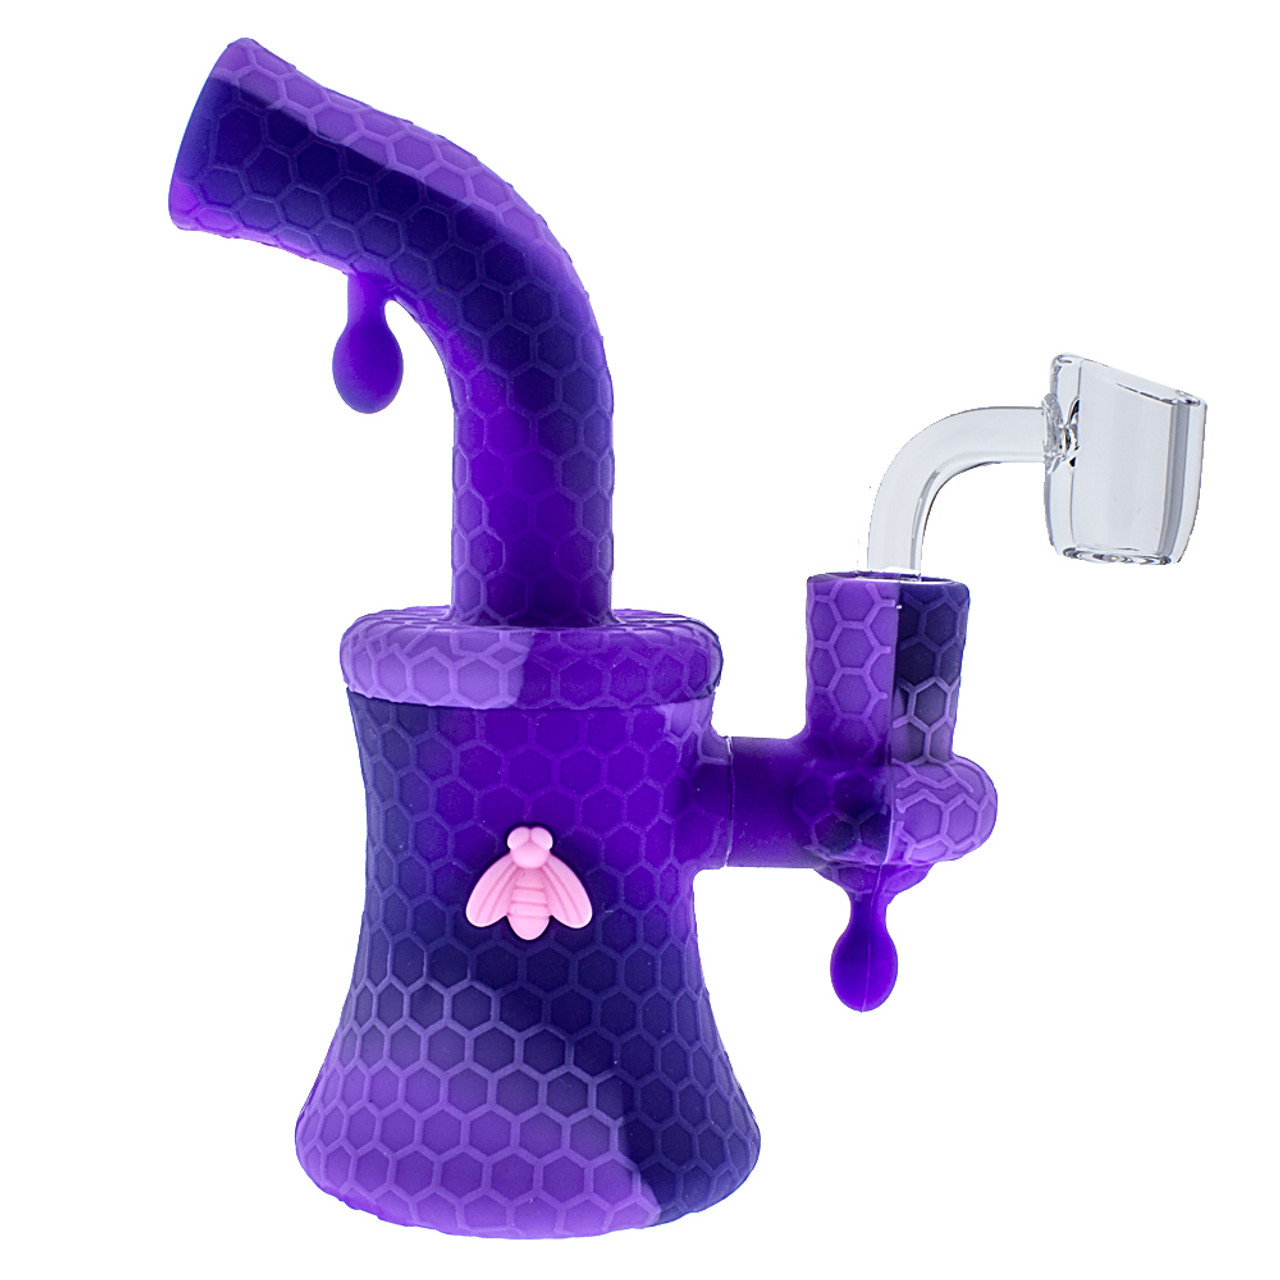 Stratus - 2 in 1 Honey Dab Straw and Silicone Hand Pipe - Purple